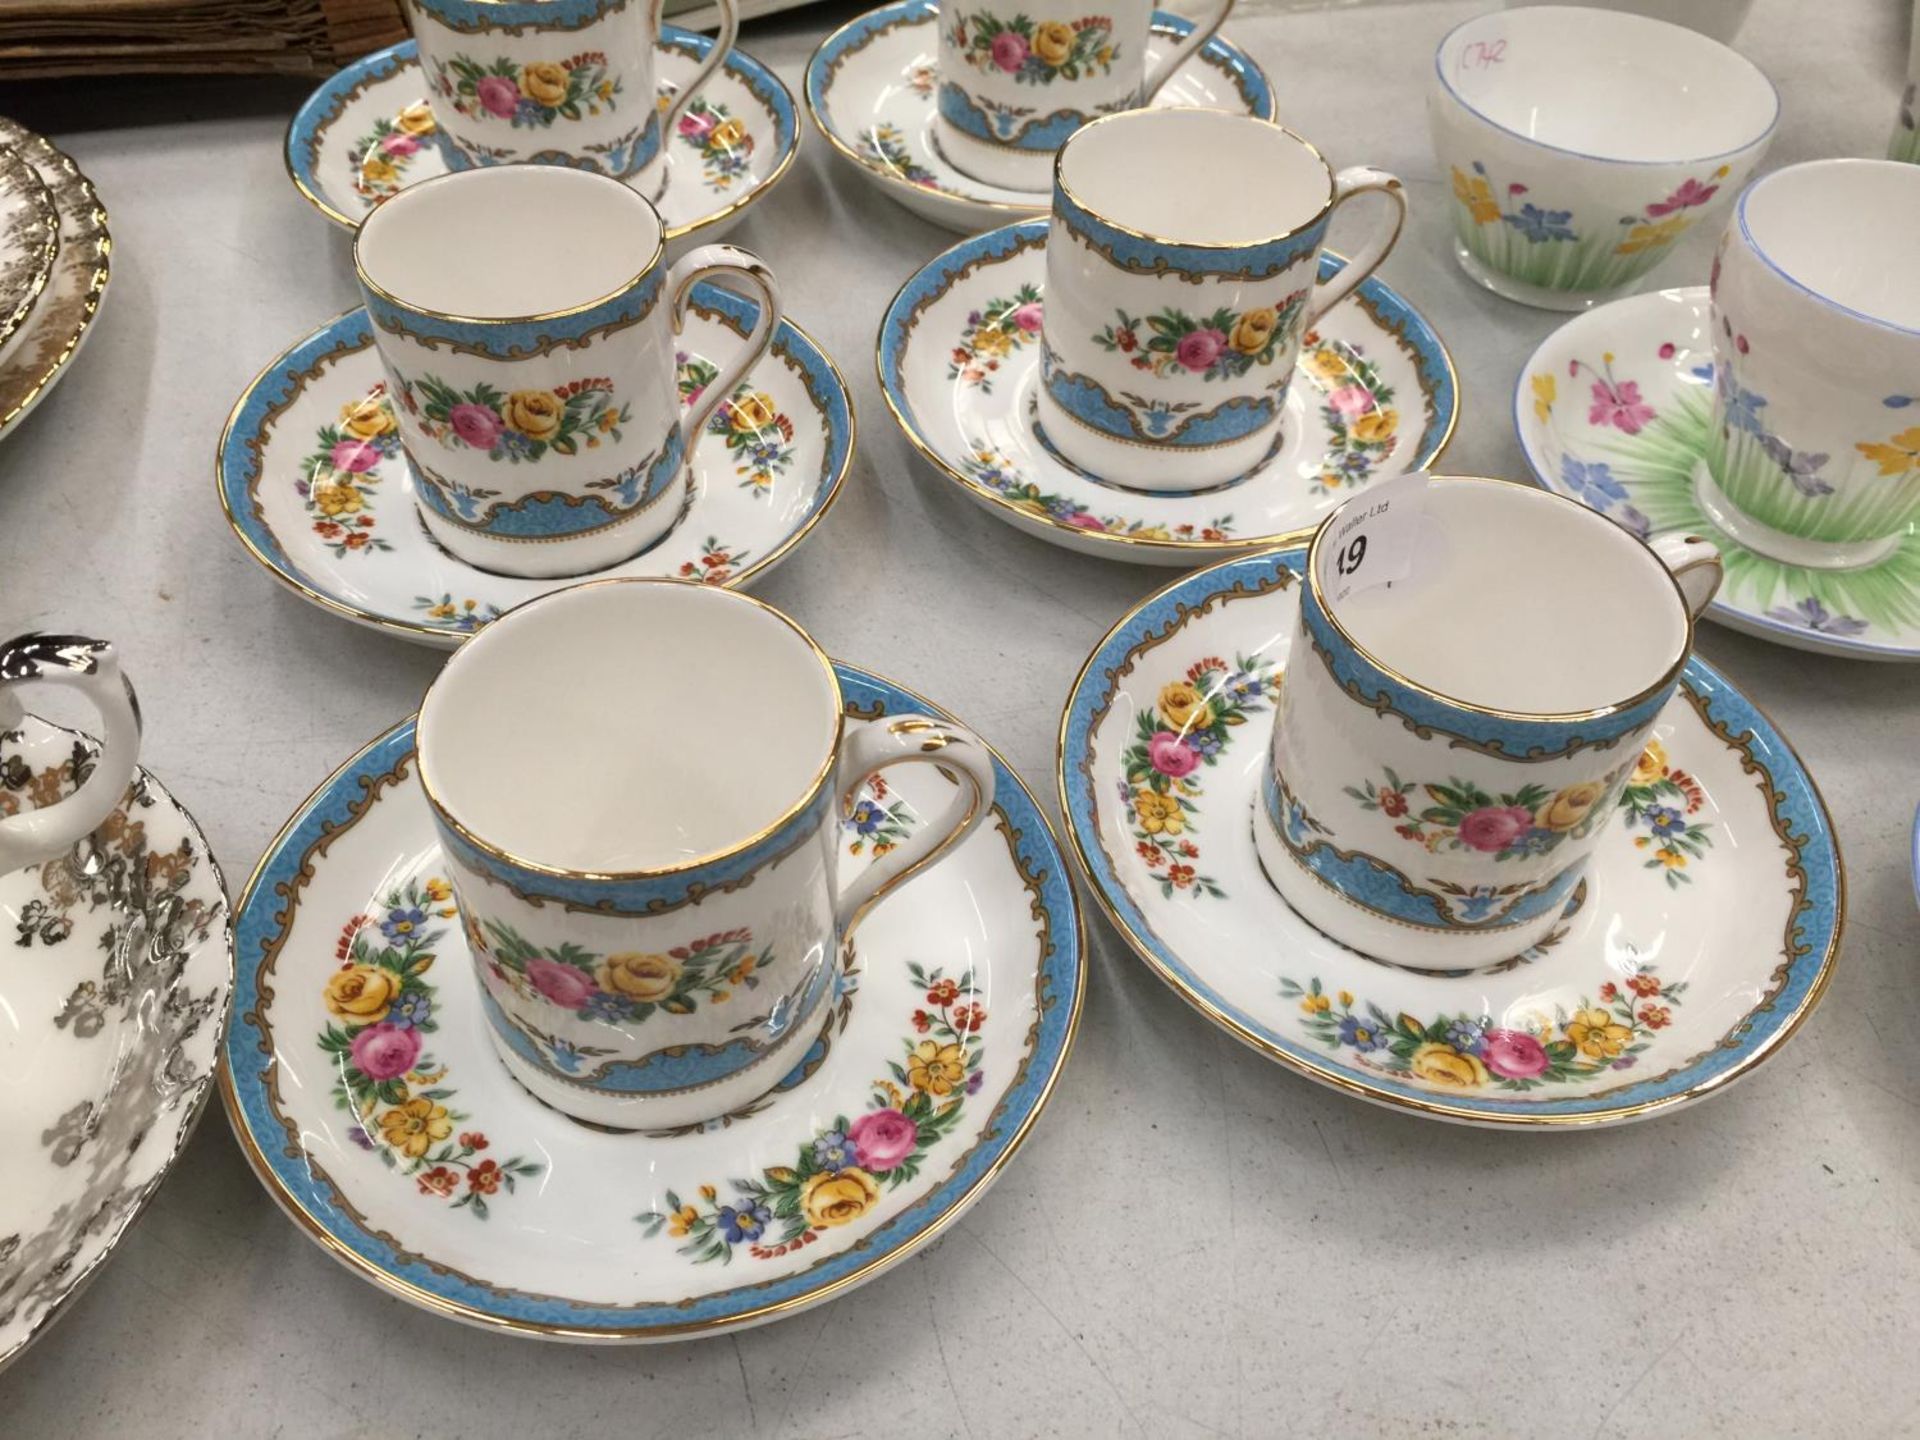 A SET OF SIX CROWN STAFFORDSHIRE CHINA DEMI-TASSE COFFEE CANS AND SAUCERS WITH A FLORAL PATTERN - Image 2 of 3